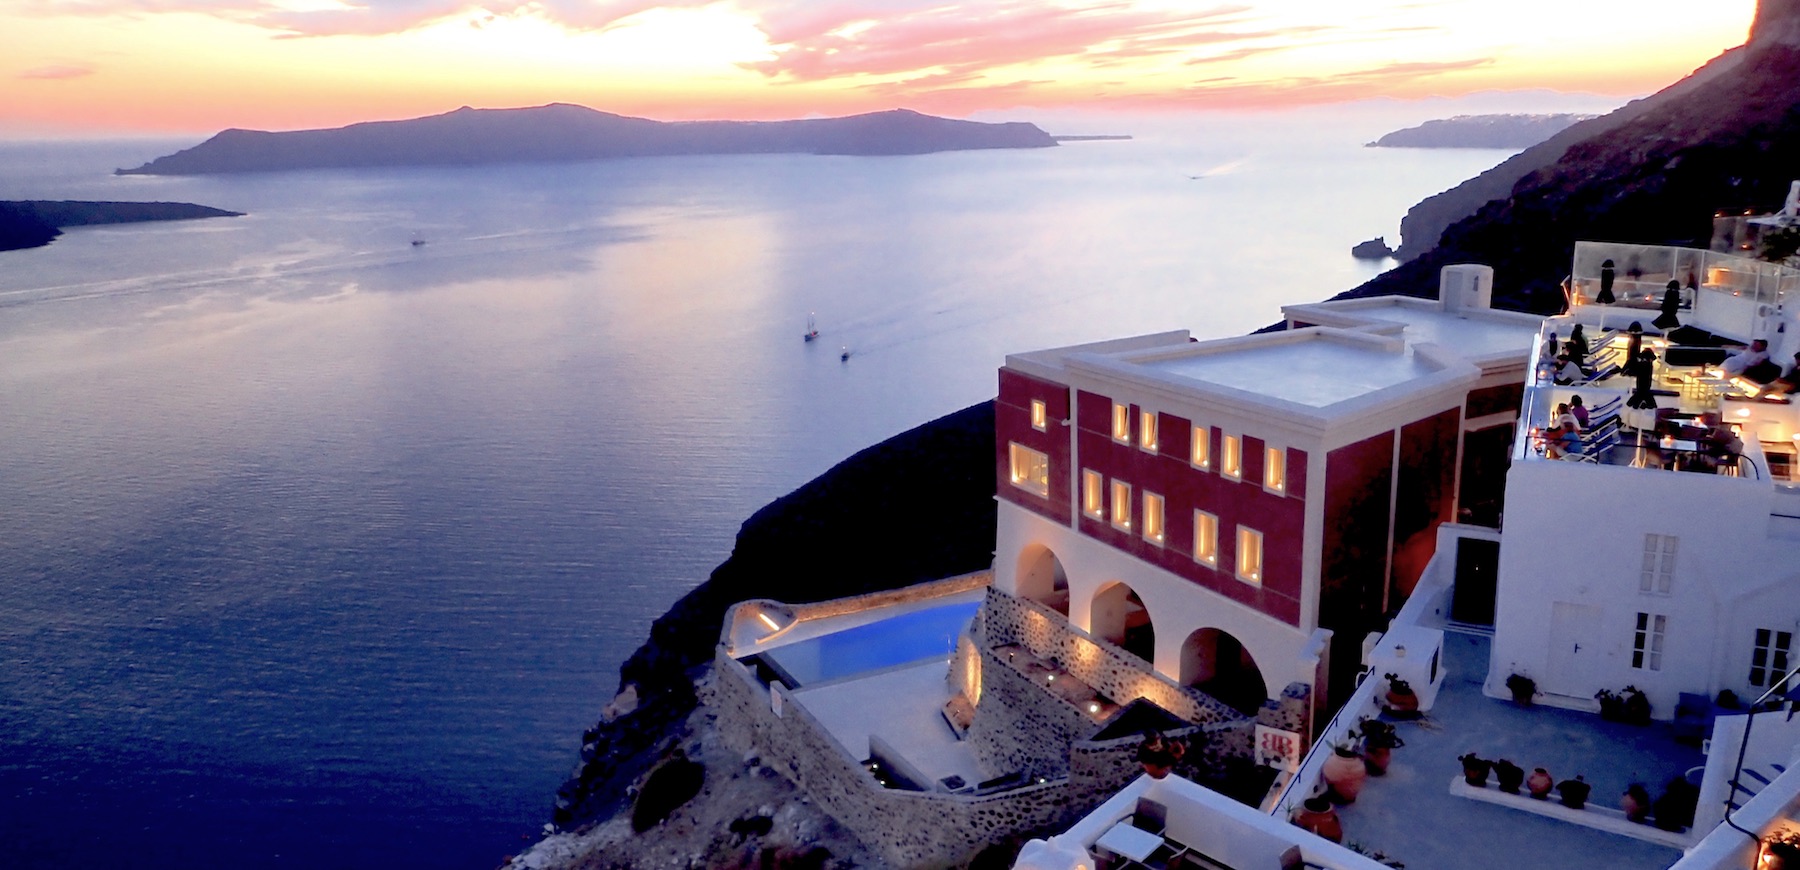 Project Completed: Luxury Hotel in Santorini